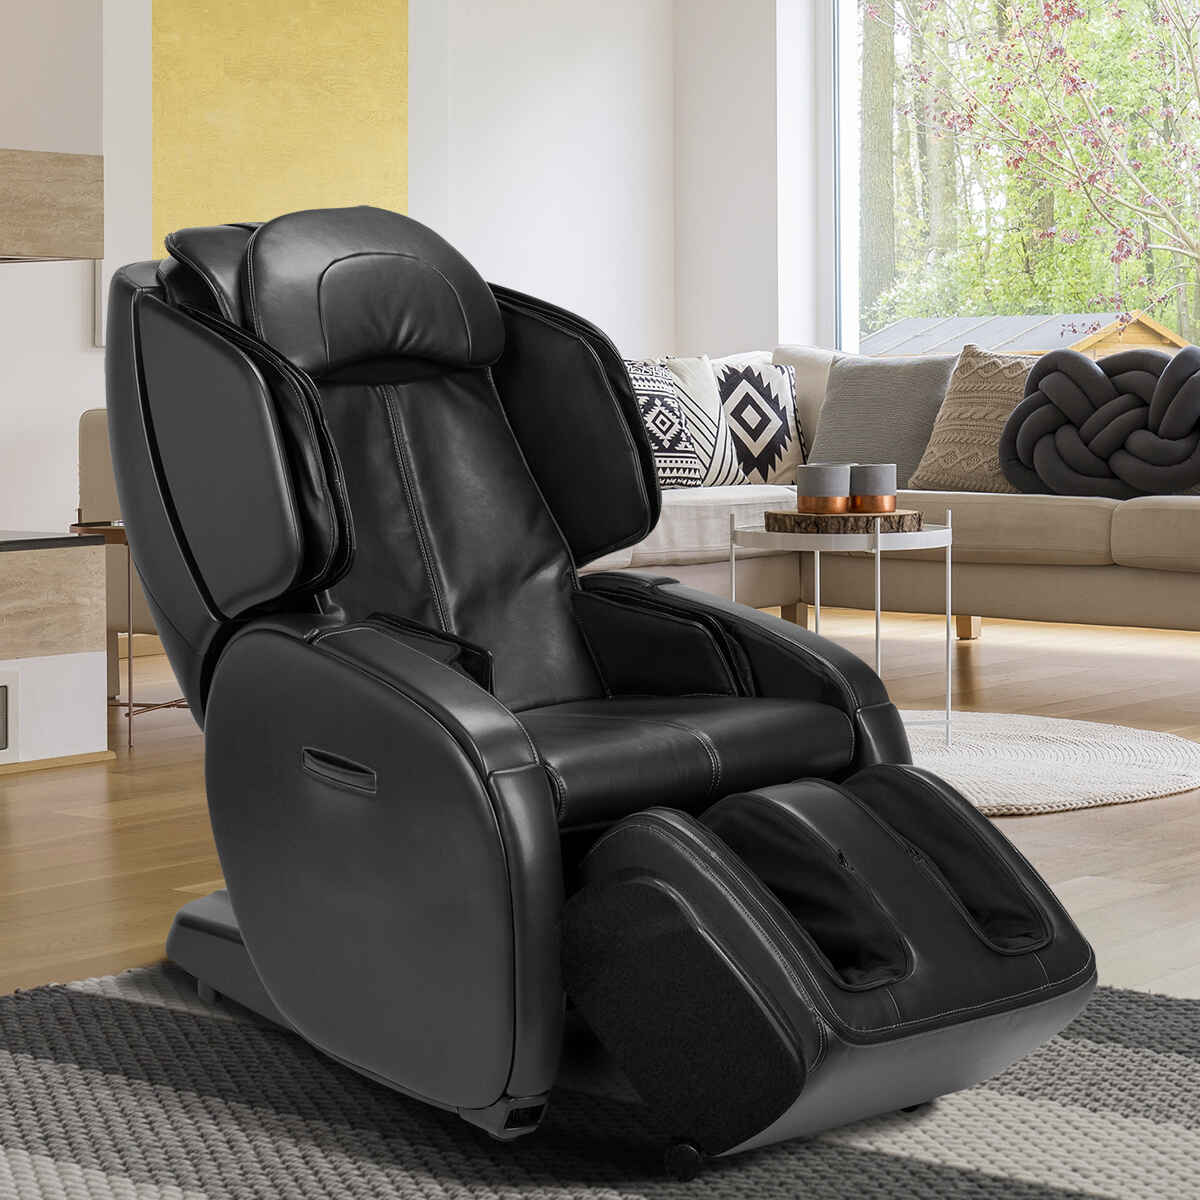 AcuTouch 6.1 massage chair